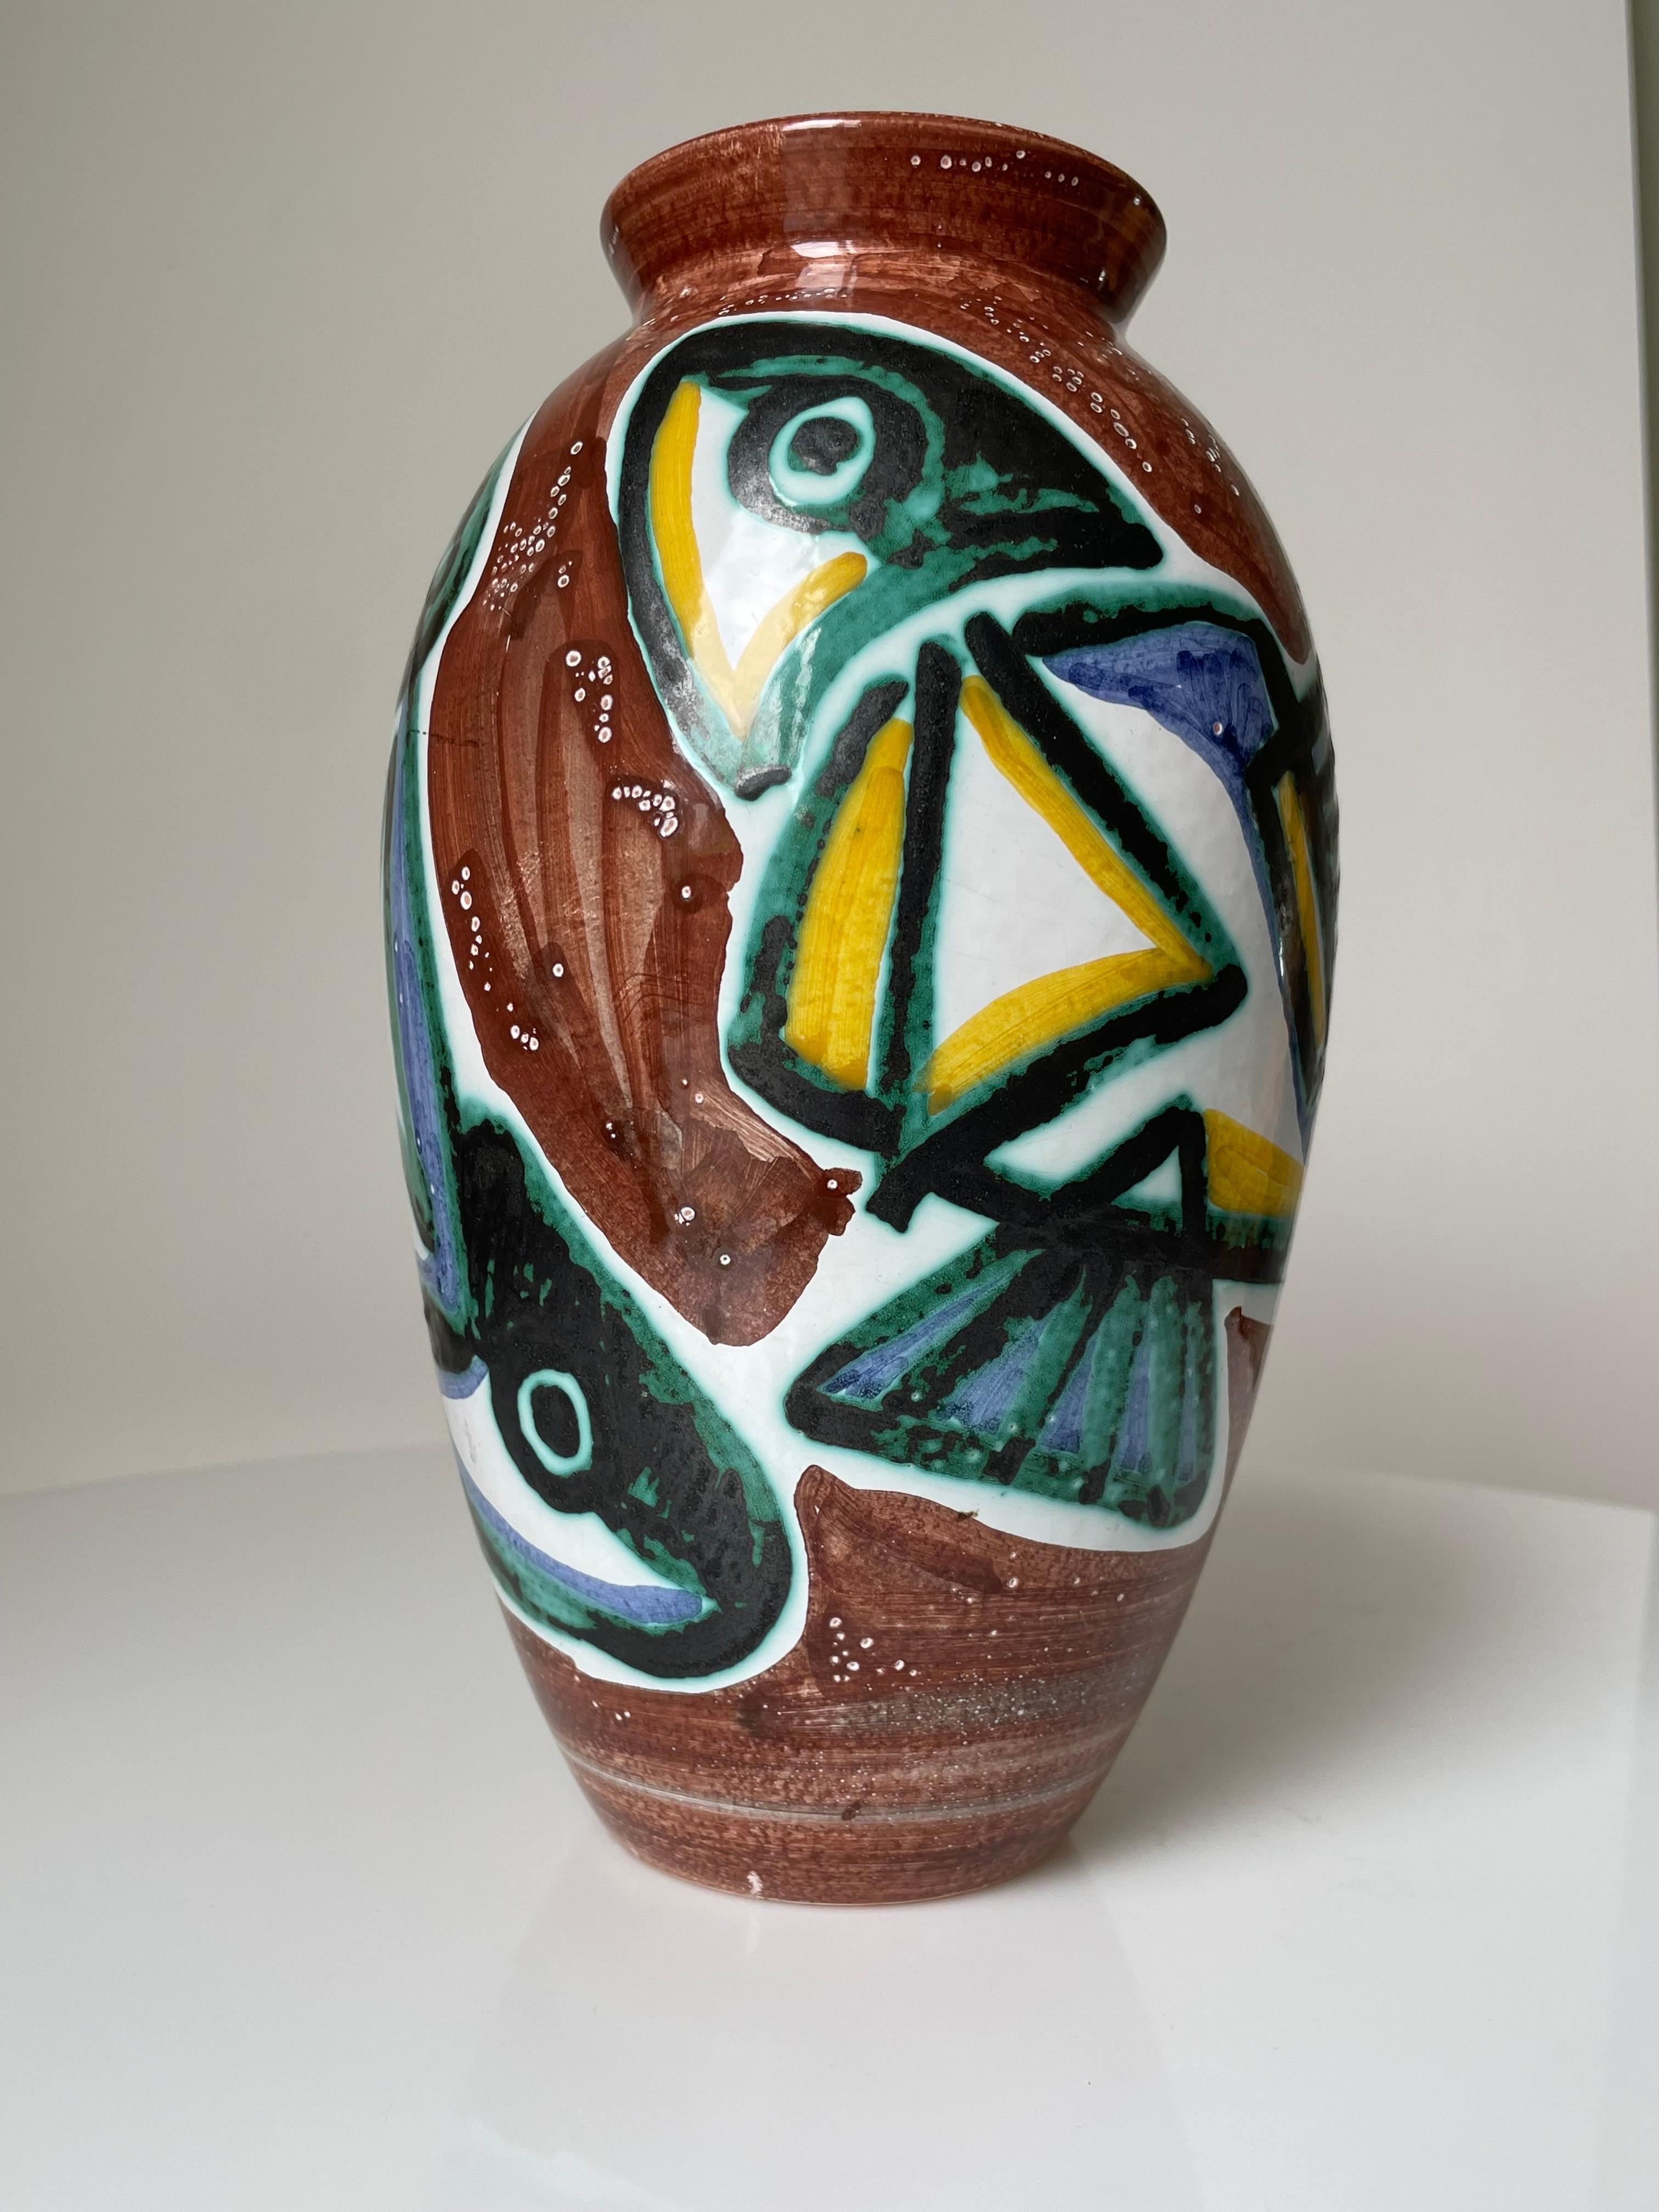 Handpainted ceramic vase manufactured in the 1960s by Johgus Keramik on the island of Bornholm. Two large colorful fish in green, yellow, lilac and black glaze on caramel brown and white base. Small white dots illustrating bubbles under water.